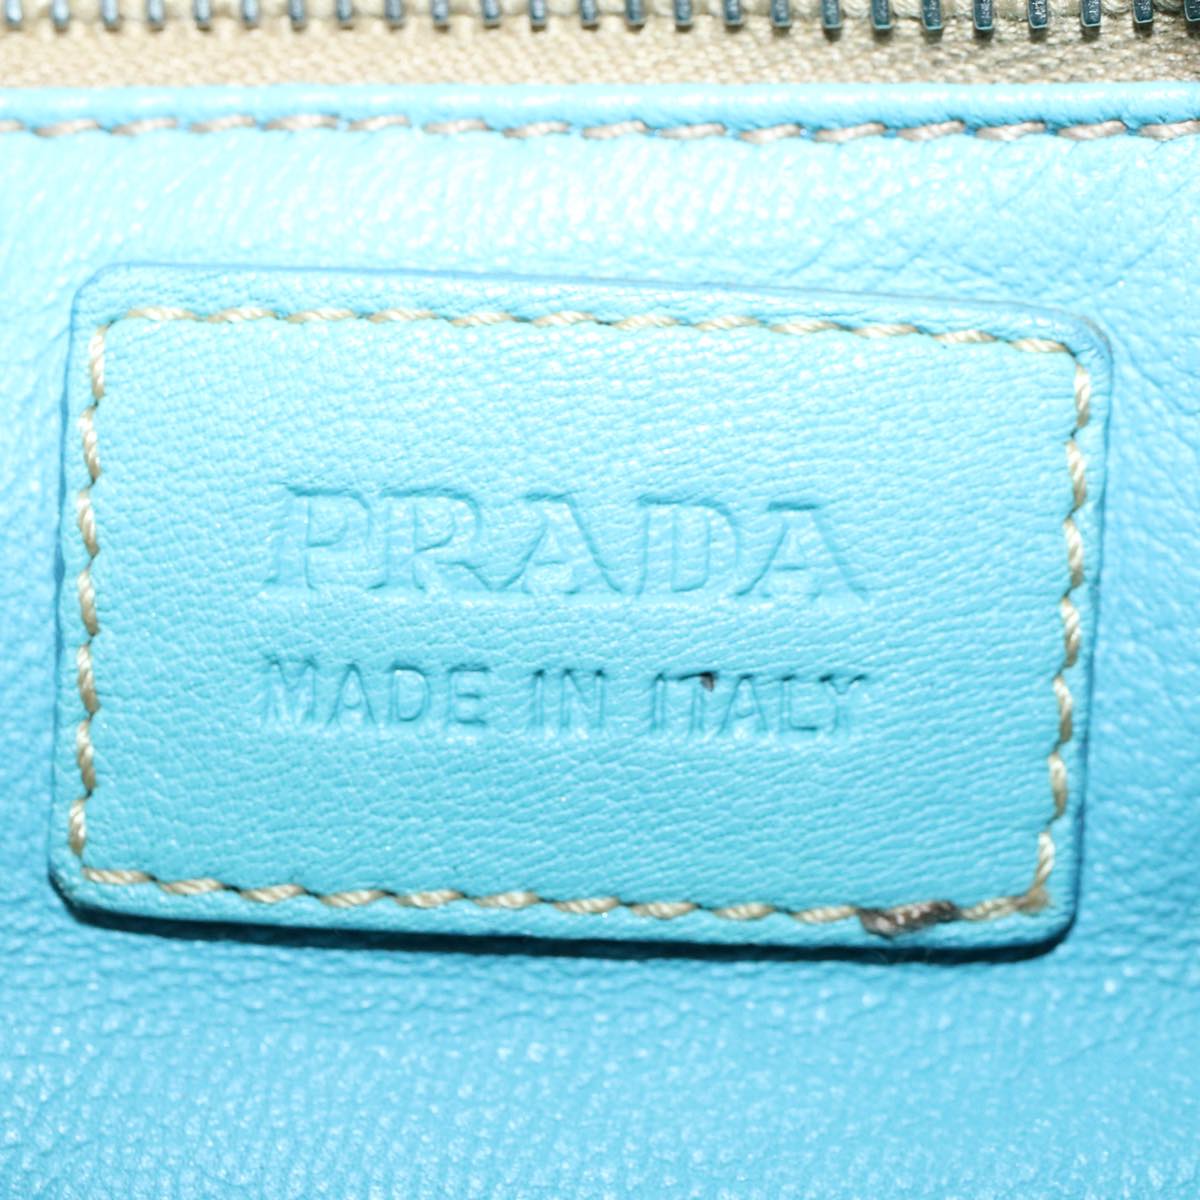 PRADA Snake pattern Hand Bag Exotic leather Turquoise Blue Auth 55080